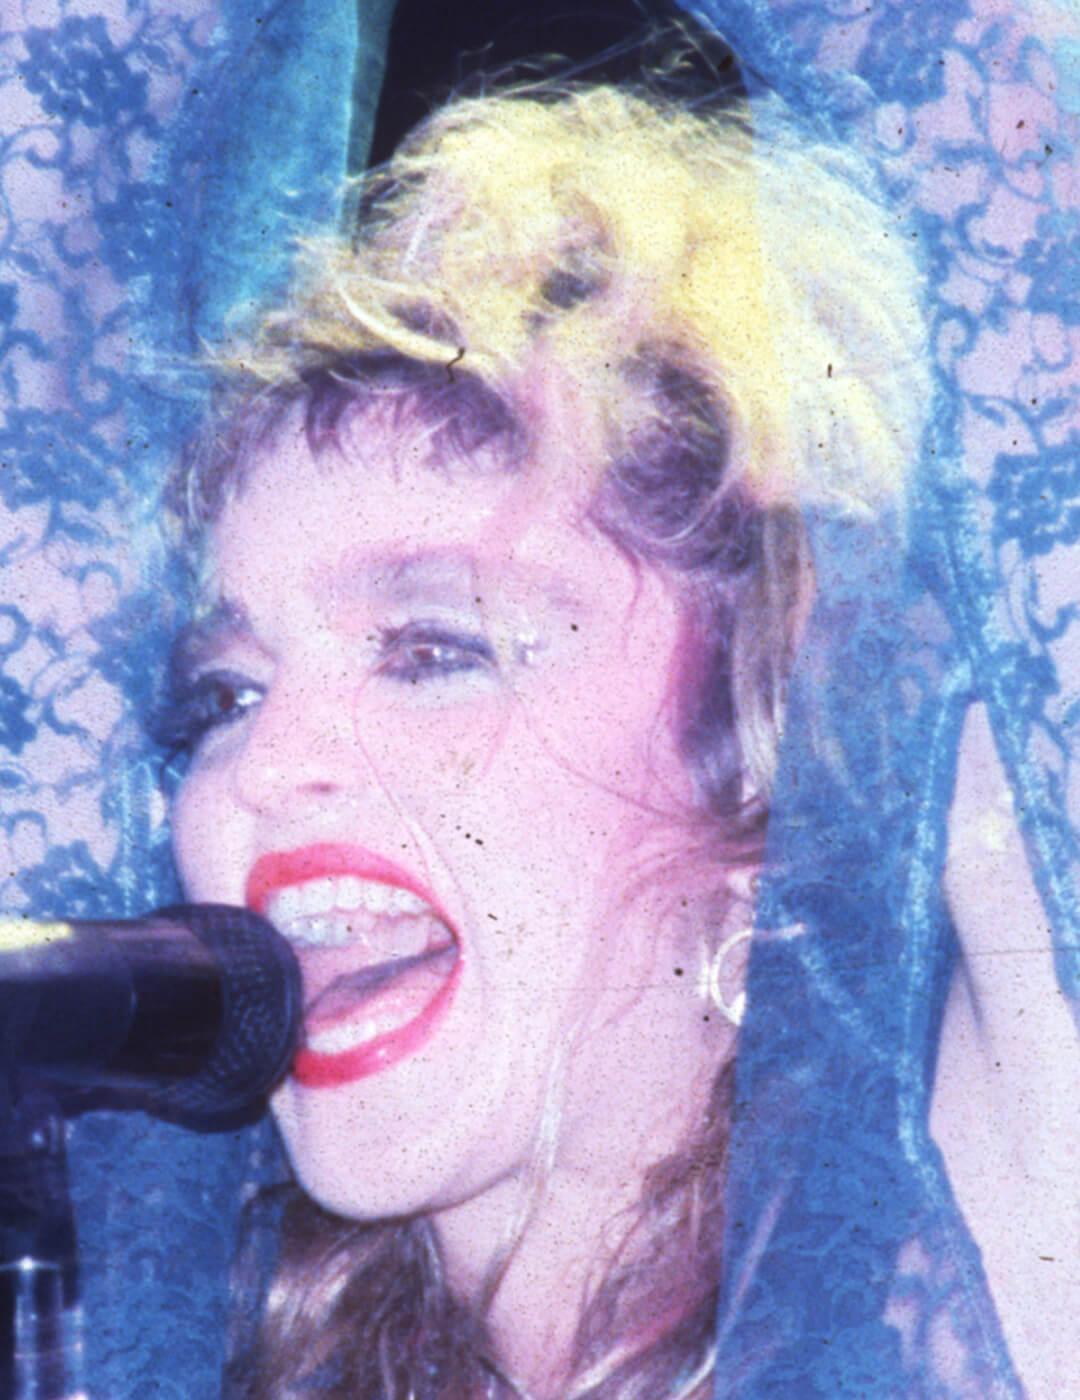 A photo of Madonna onstage at Madison Square Garden in 1984 in New York City